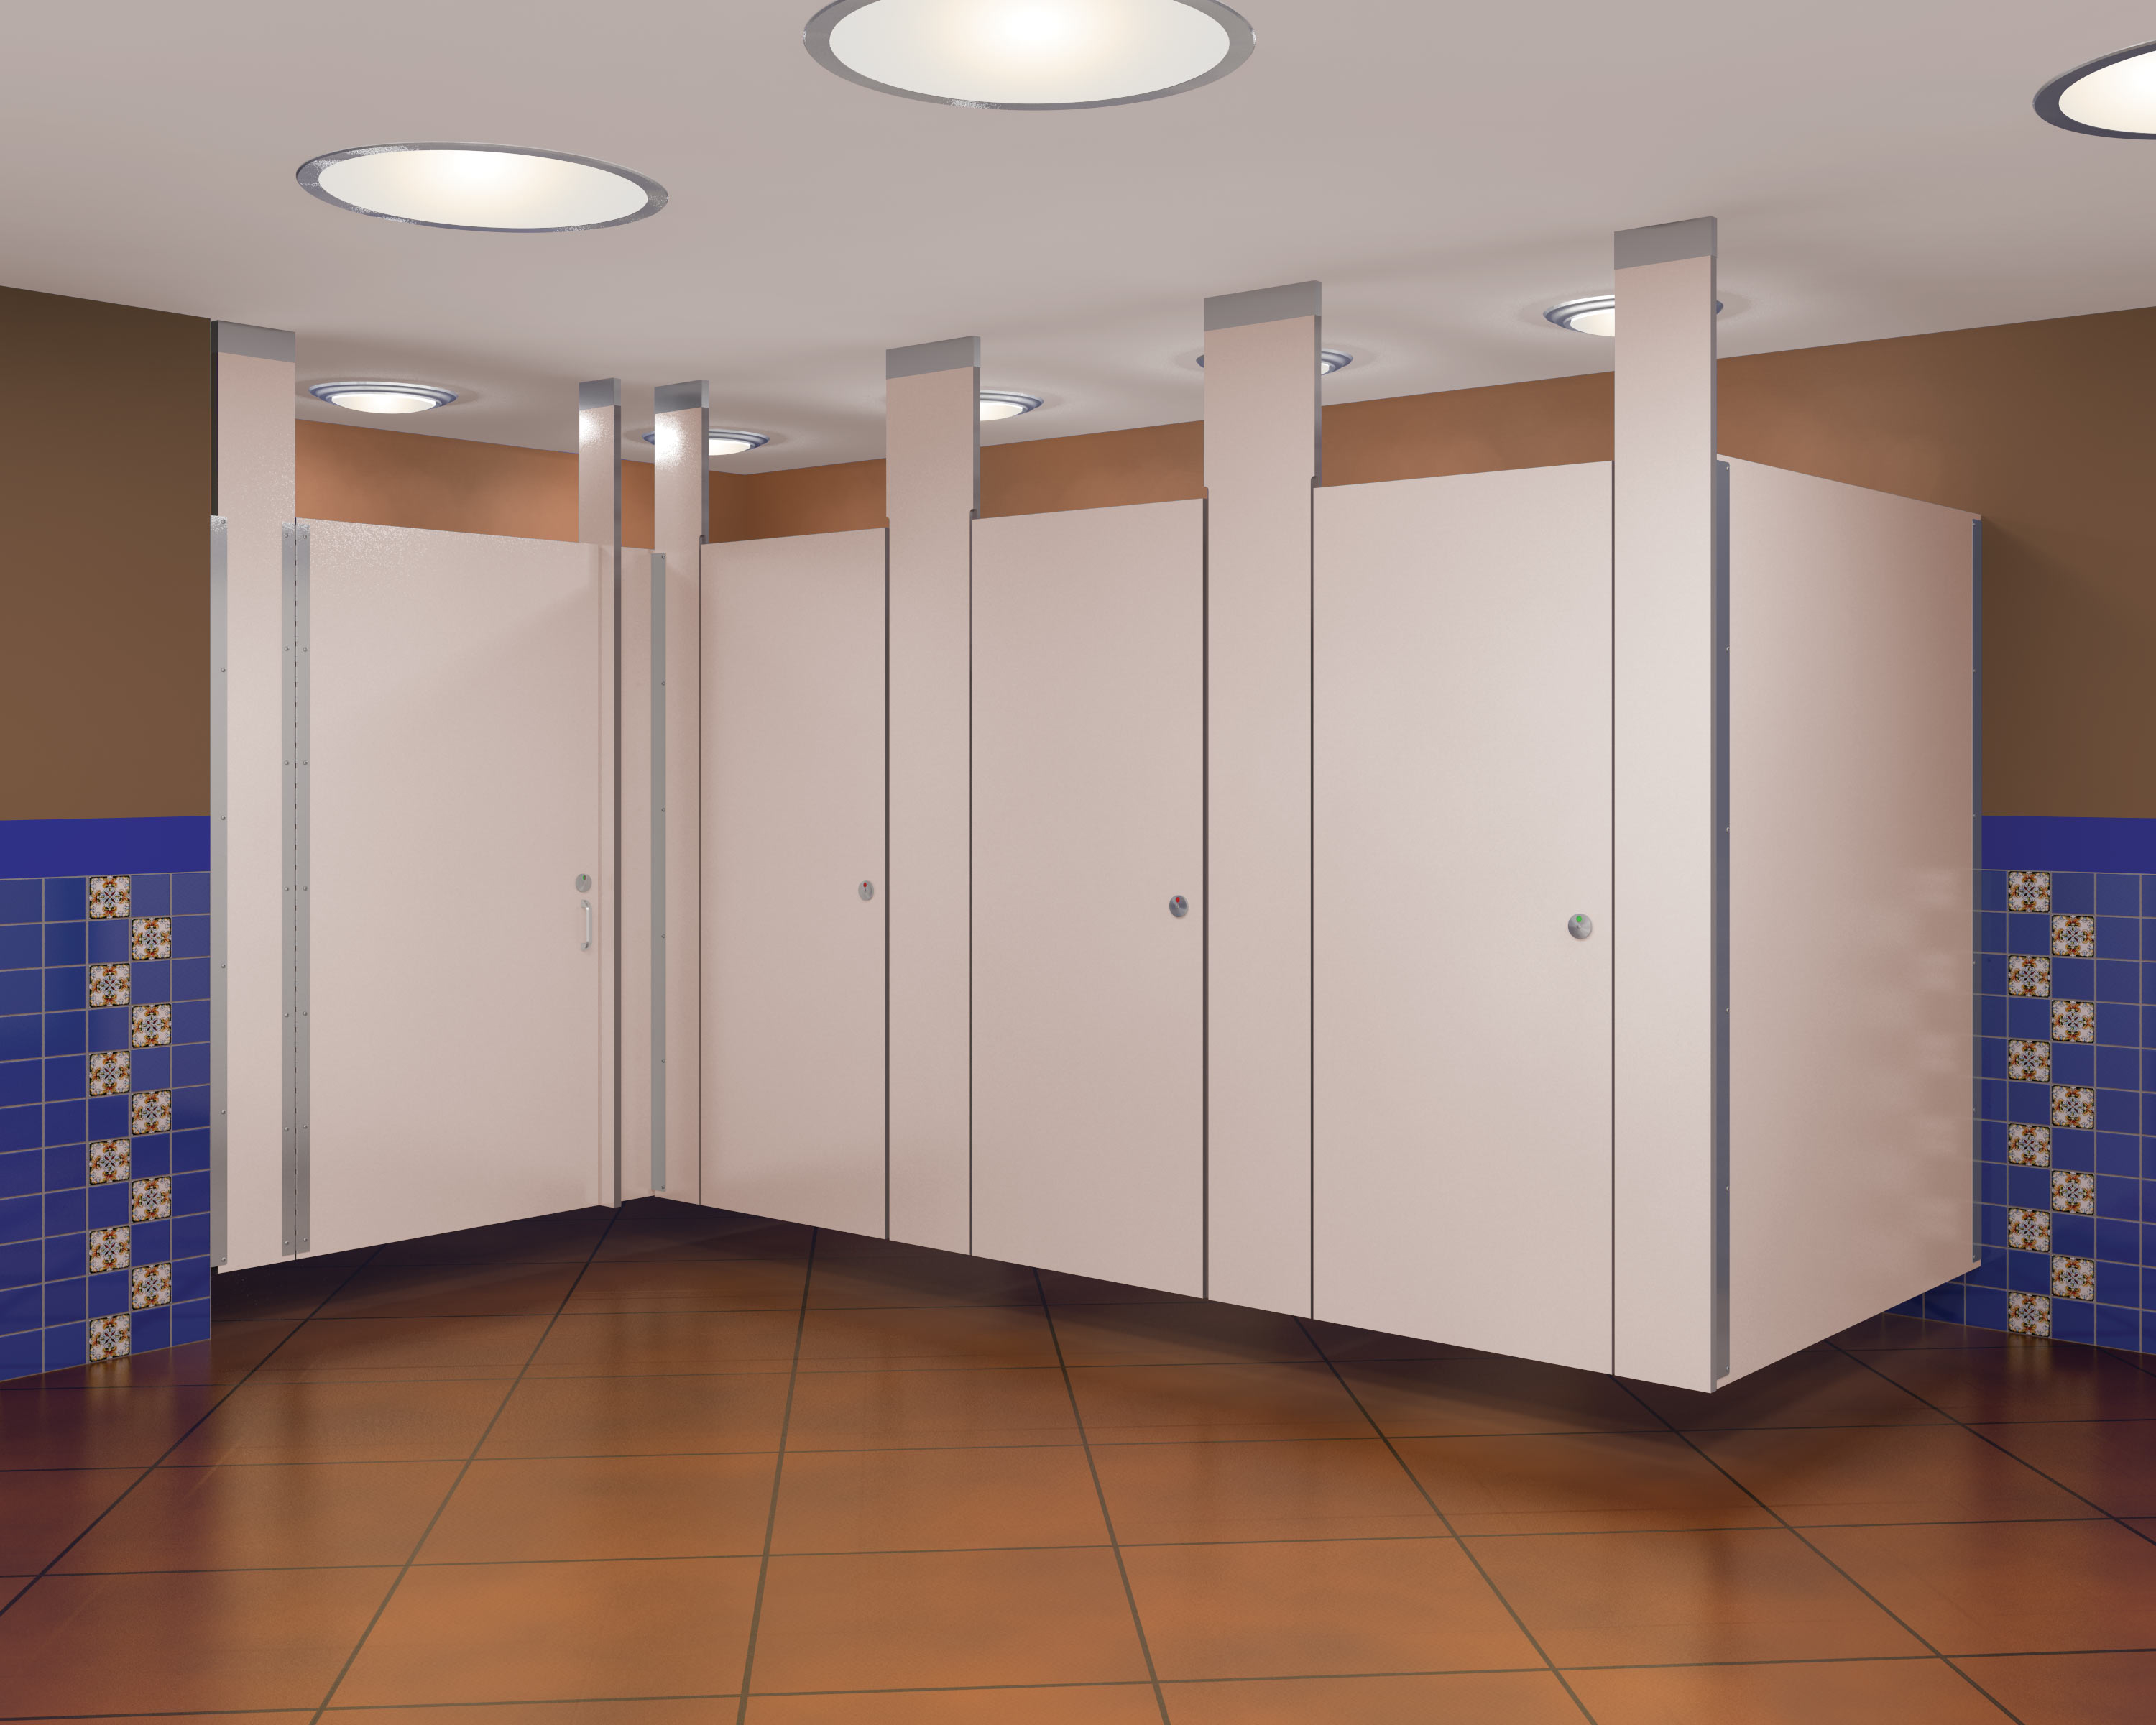 Ceiling mounted solid Phenolic core partitions in a Latin American style restroom